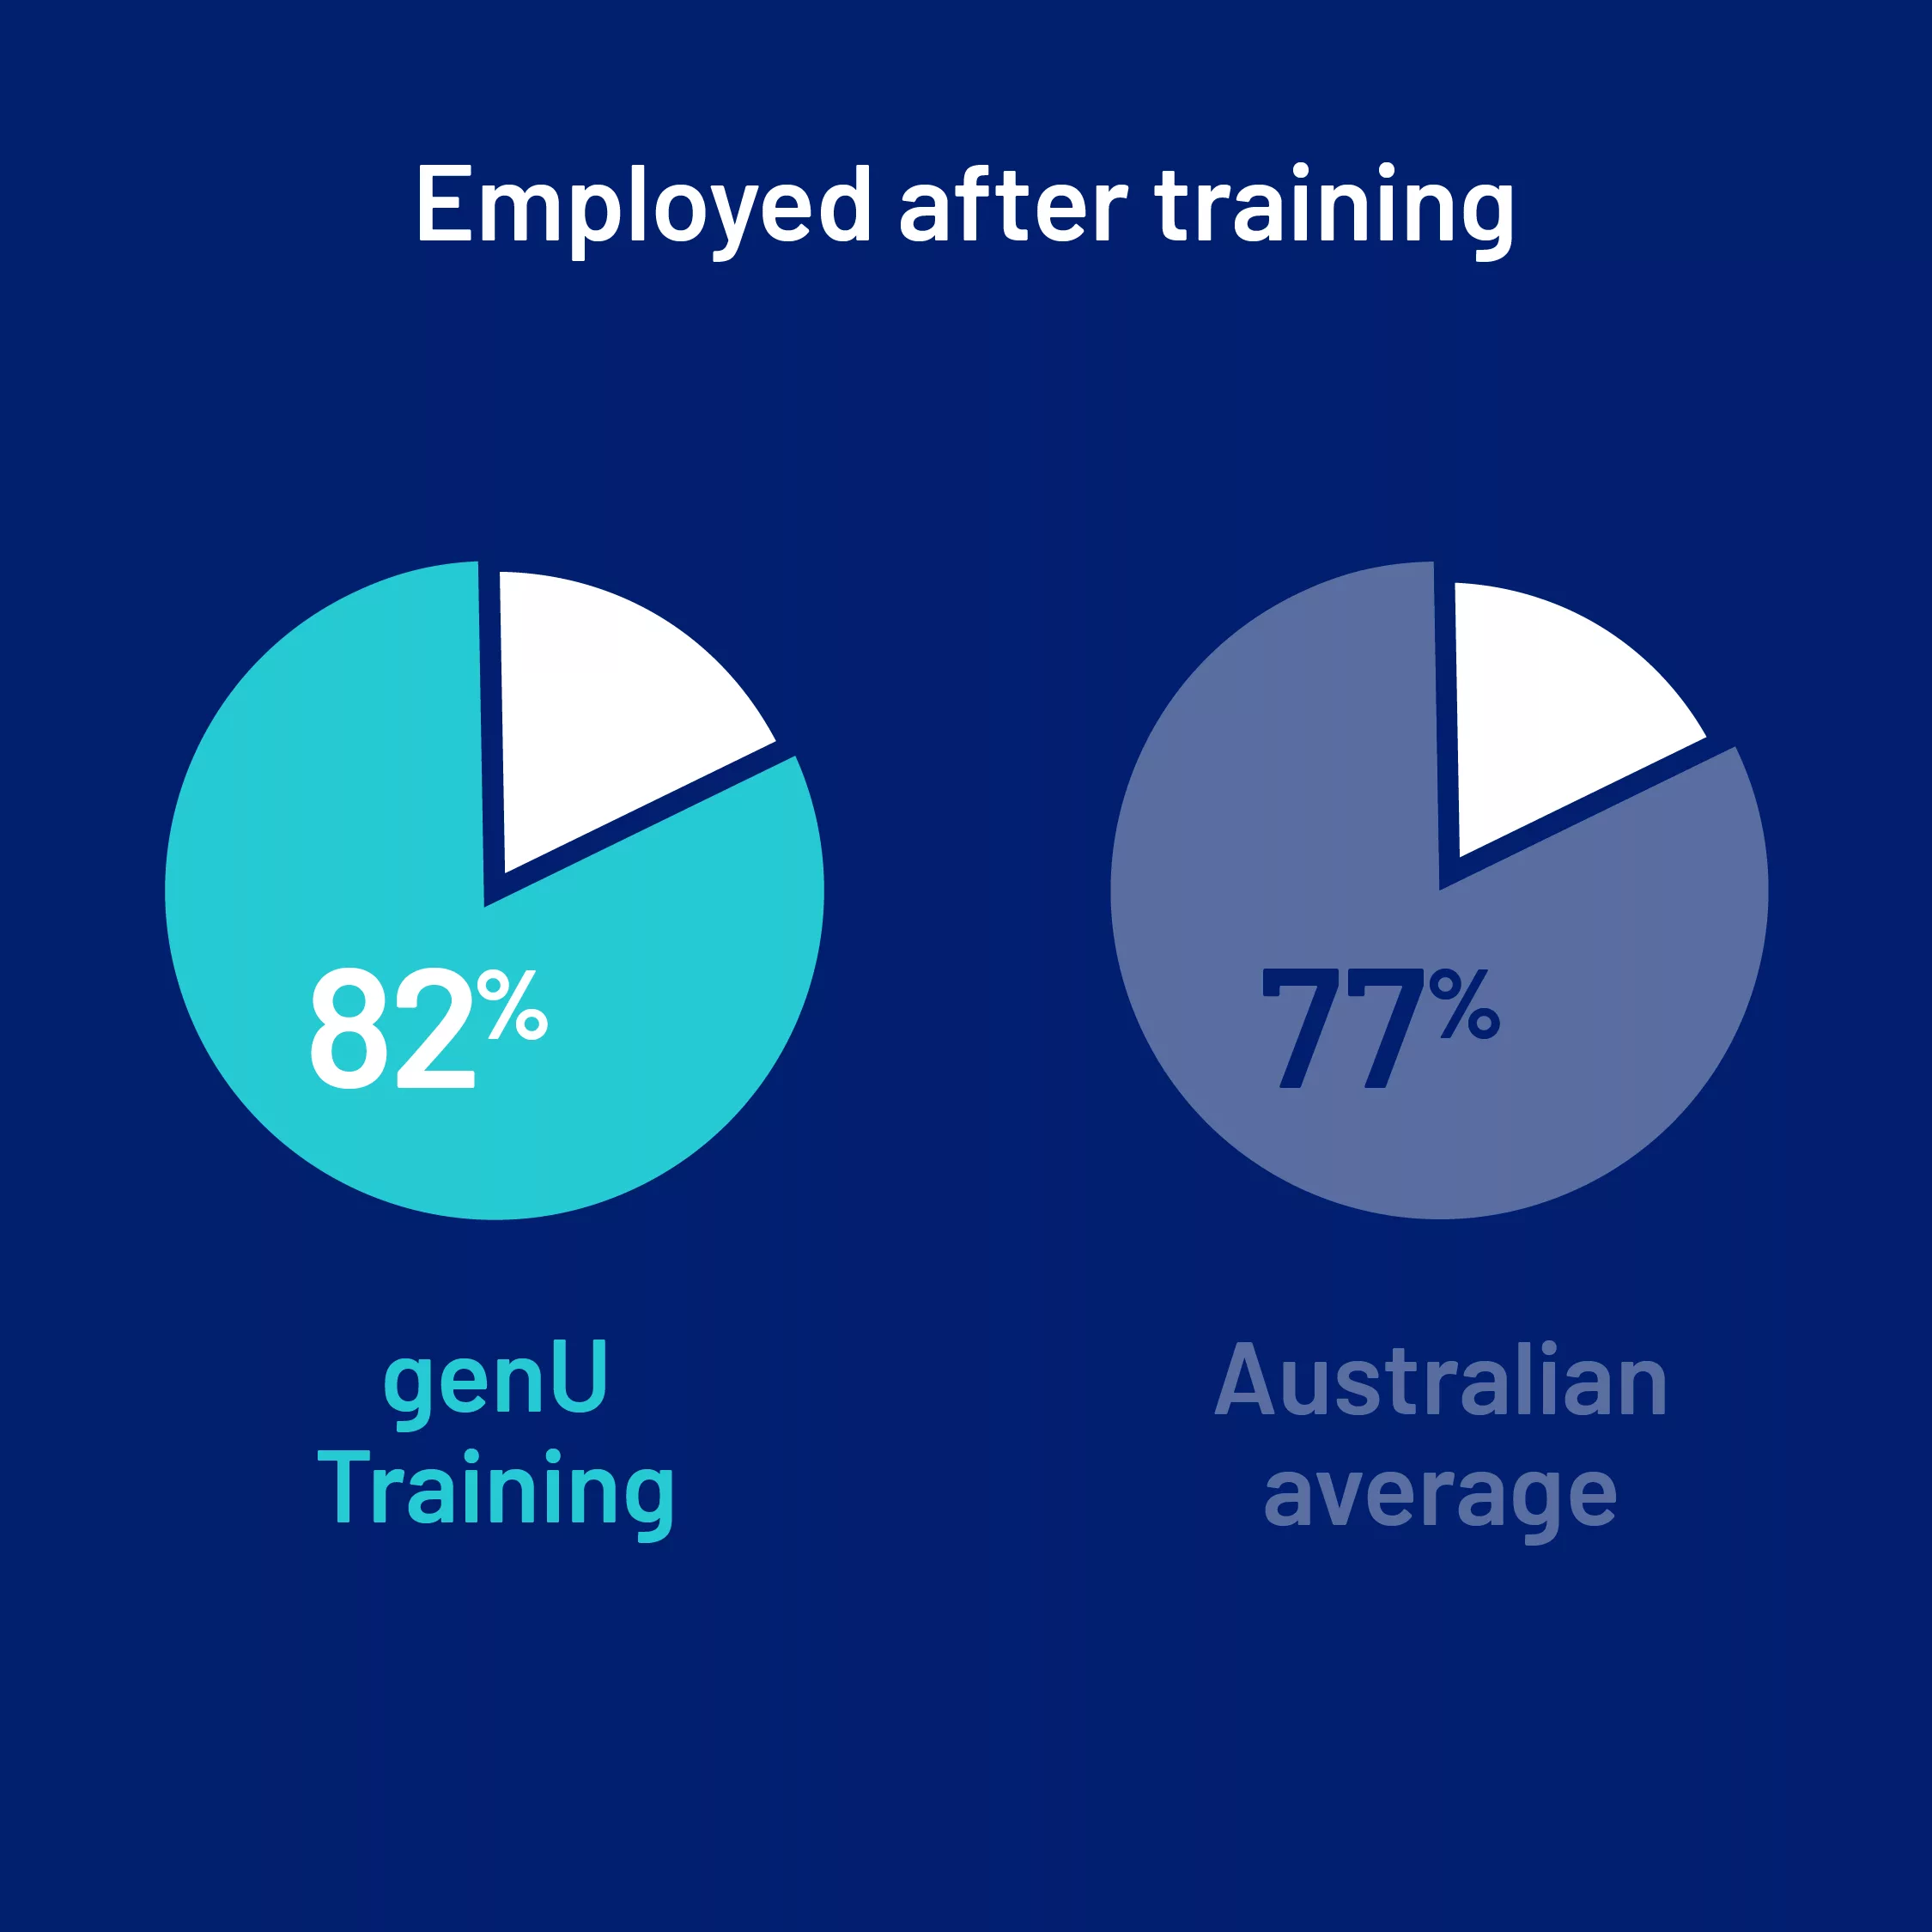 An infographic which shows that a higher percentage of genU Training students are employed after training compared to the national average